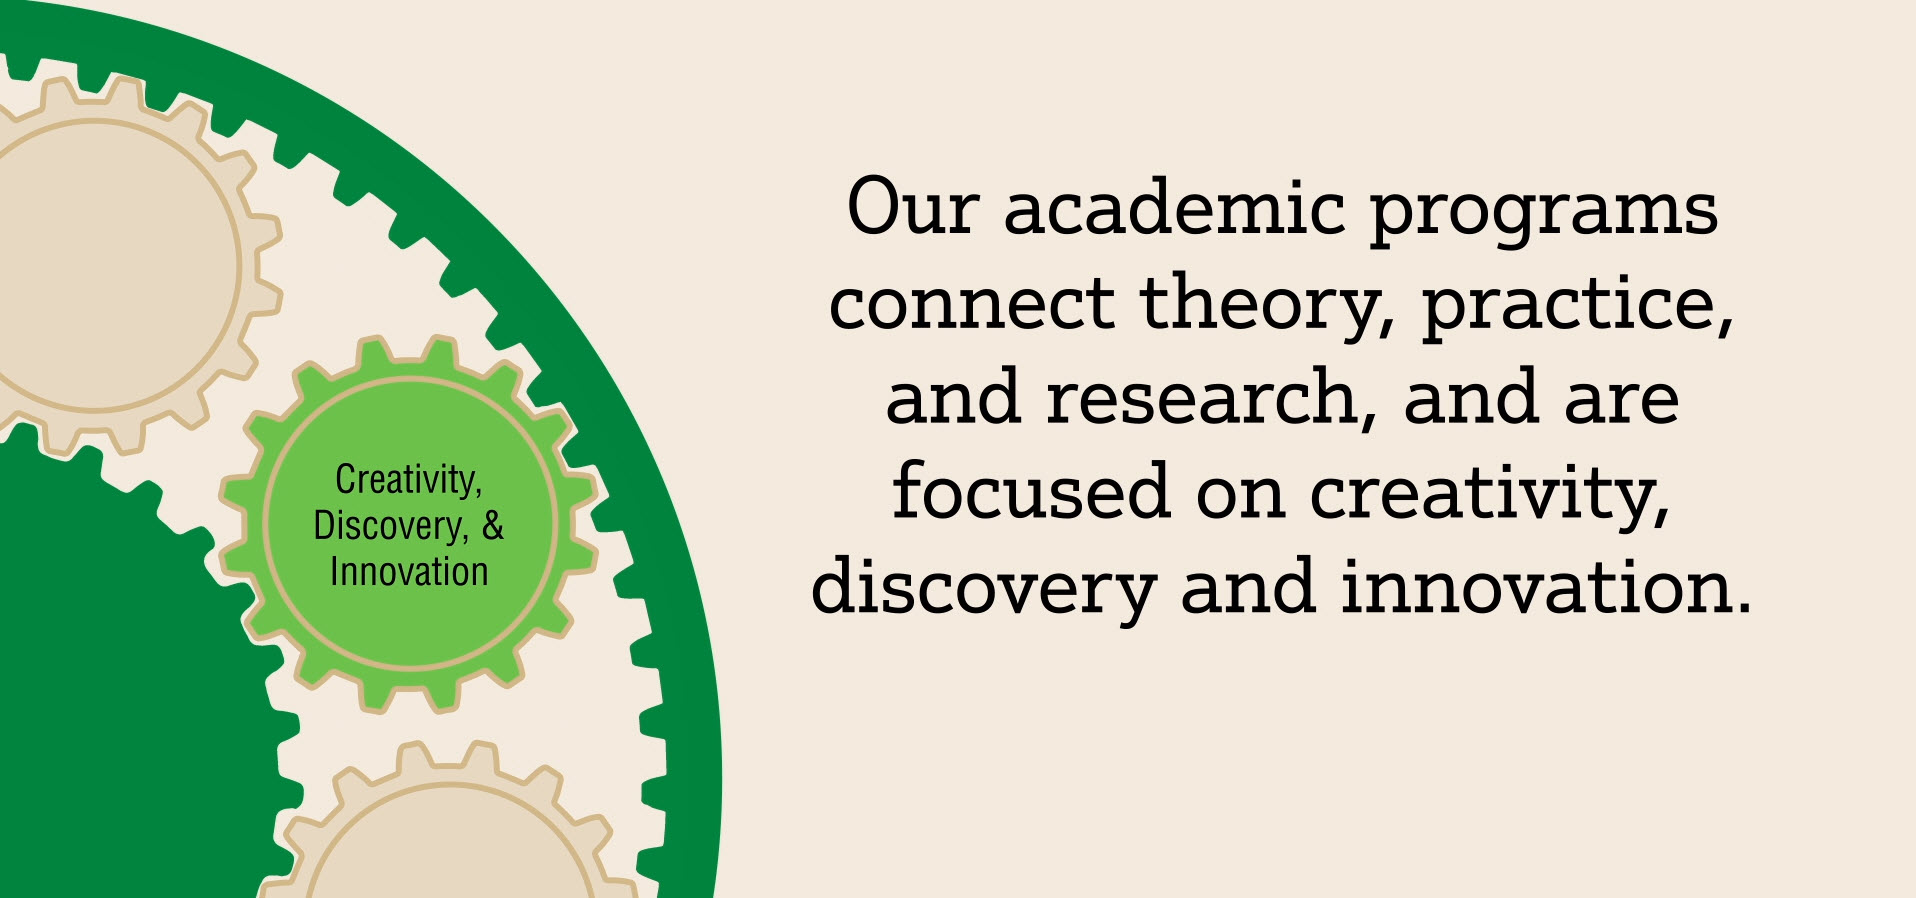 Our academic programs connect theory, practice, and research, and are focused on creativity, discovery and innovation.